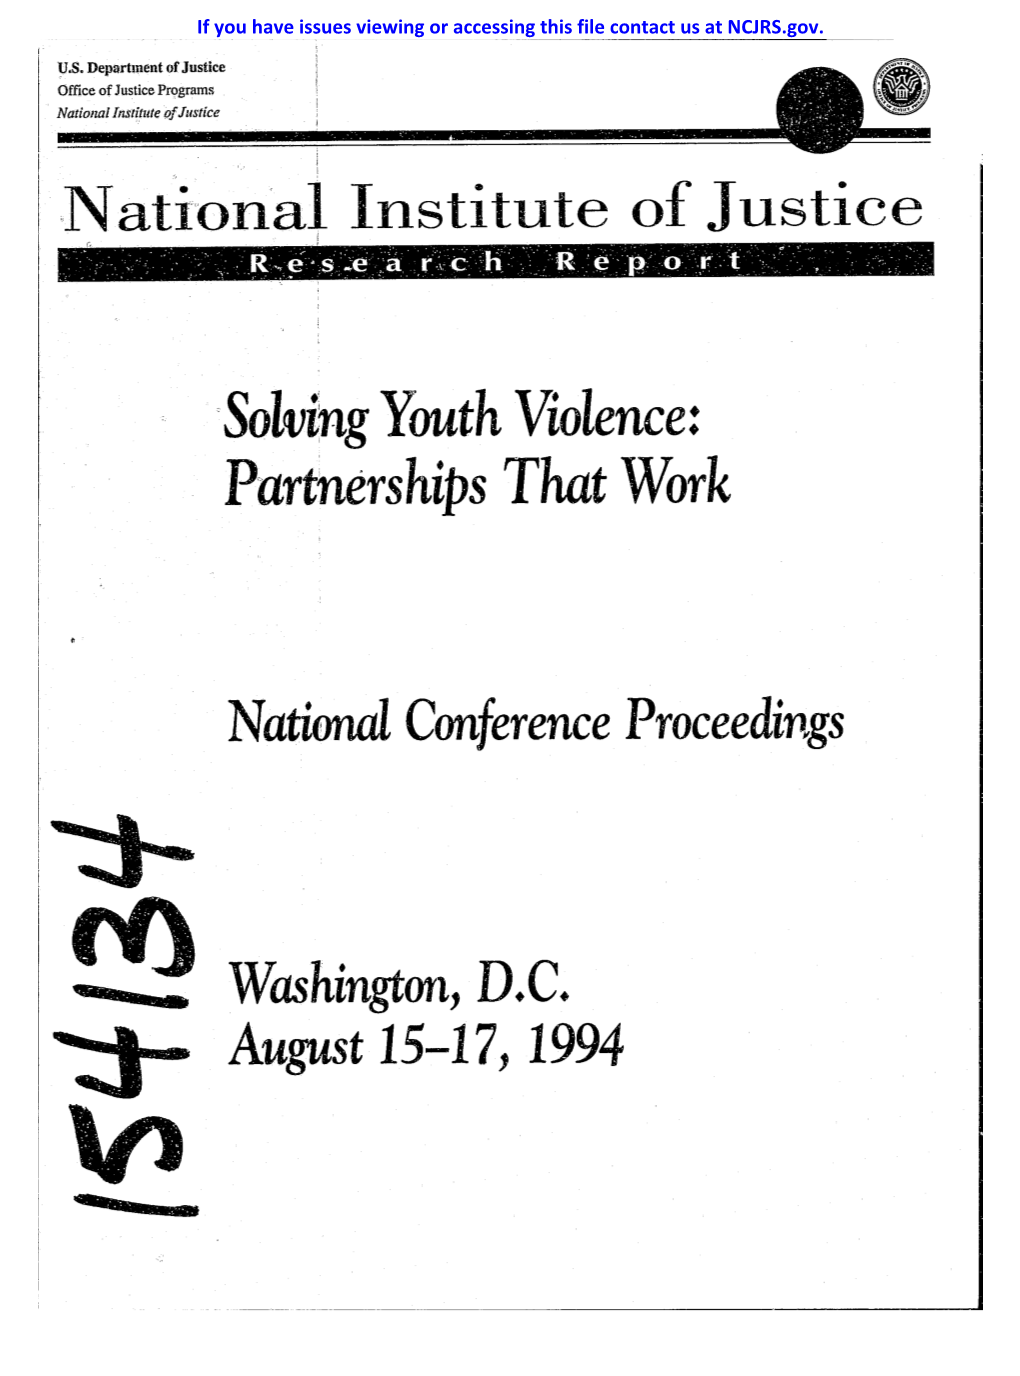 Solving Youth Violence: Partnerships That Work